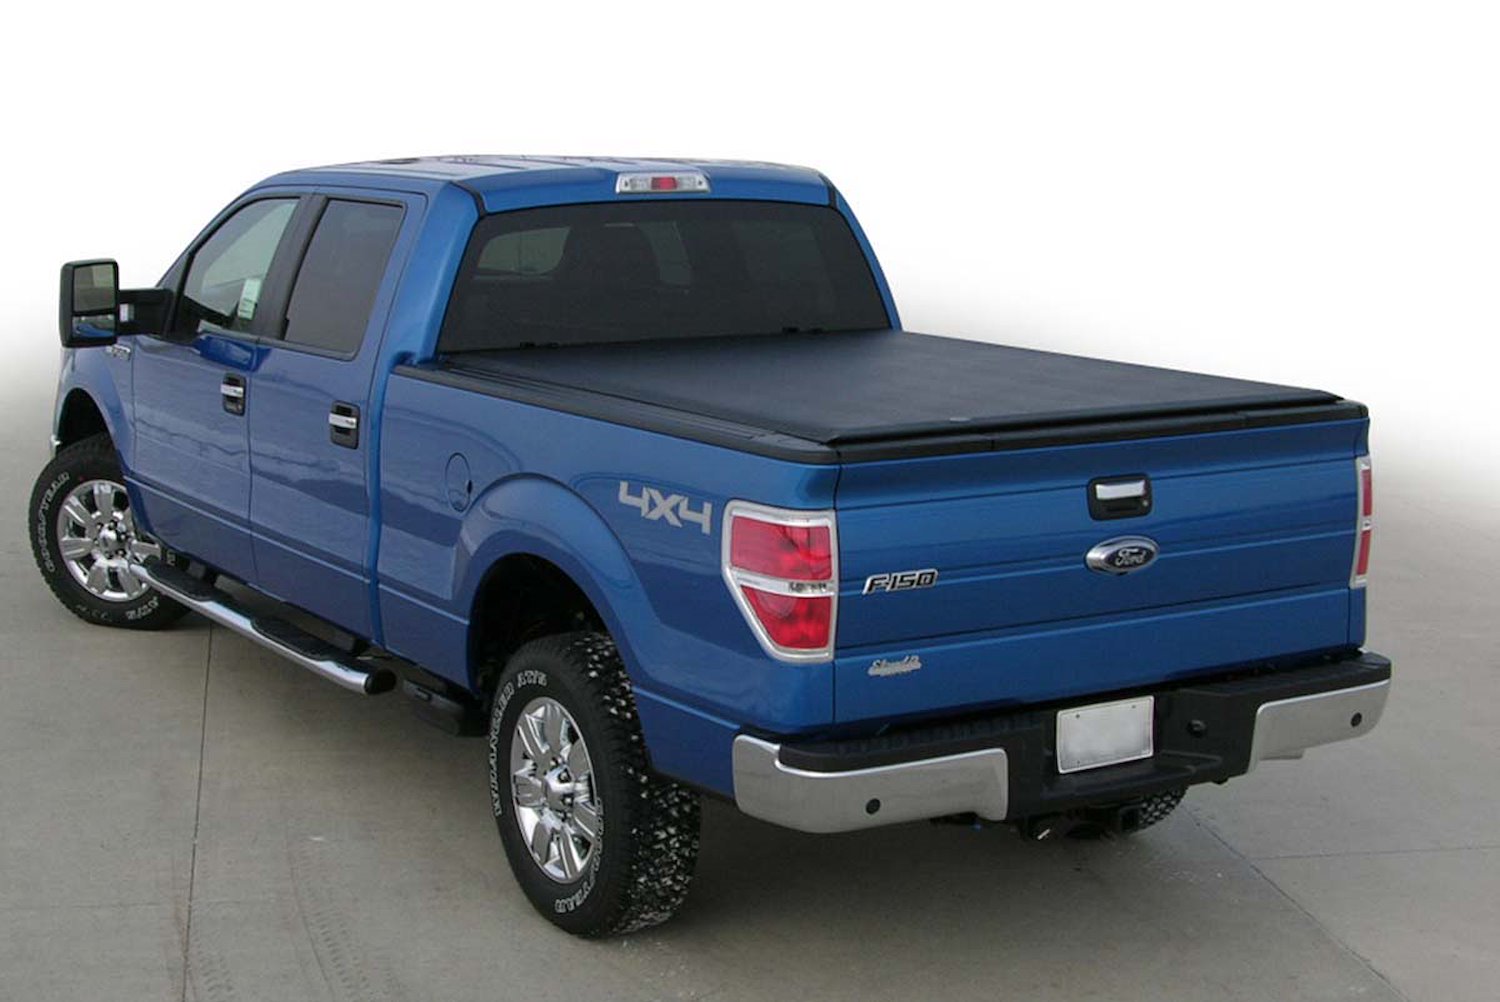 LORADO Roll-Up Tonneau Cover, Fits Select Ford Ranger, with 5 ft. Bed